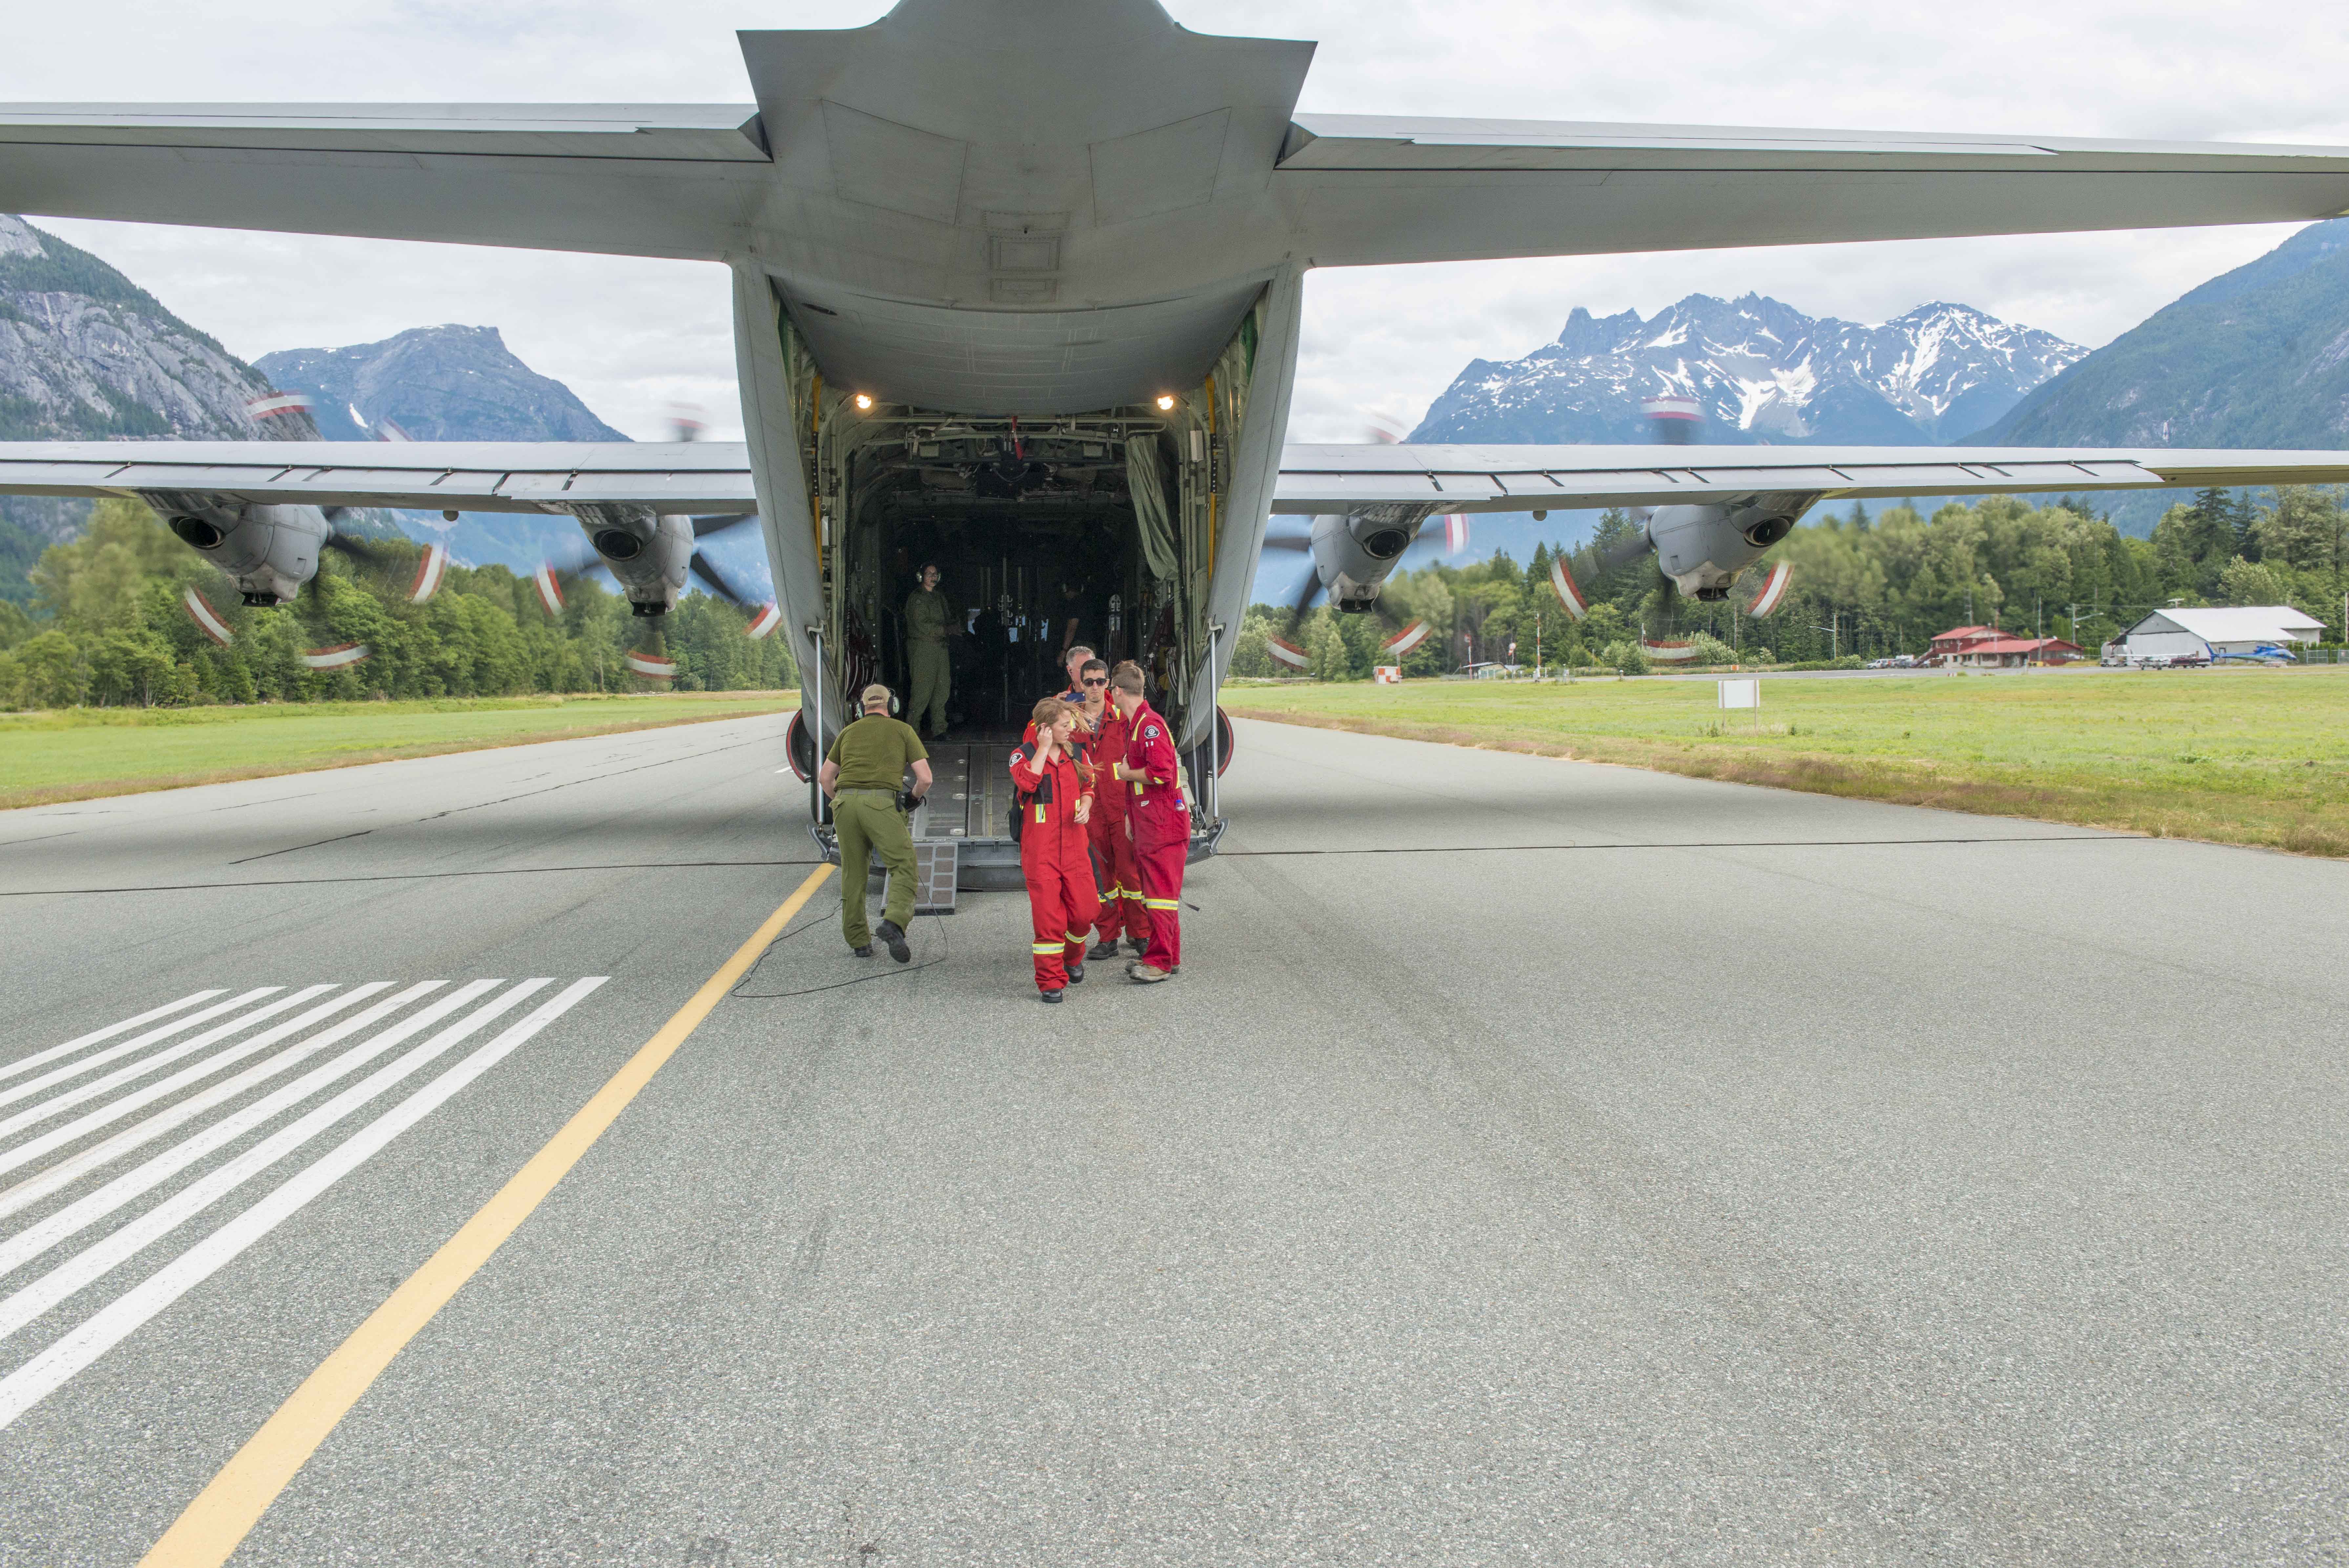 Bella Coola, British Columbia. July 11, 2017 – Comox Fire Fighters get off a Hercules in support of Operation LENTUS17-04. (Image: Cpl Nathan Spence, 19 Wing Imaging)